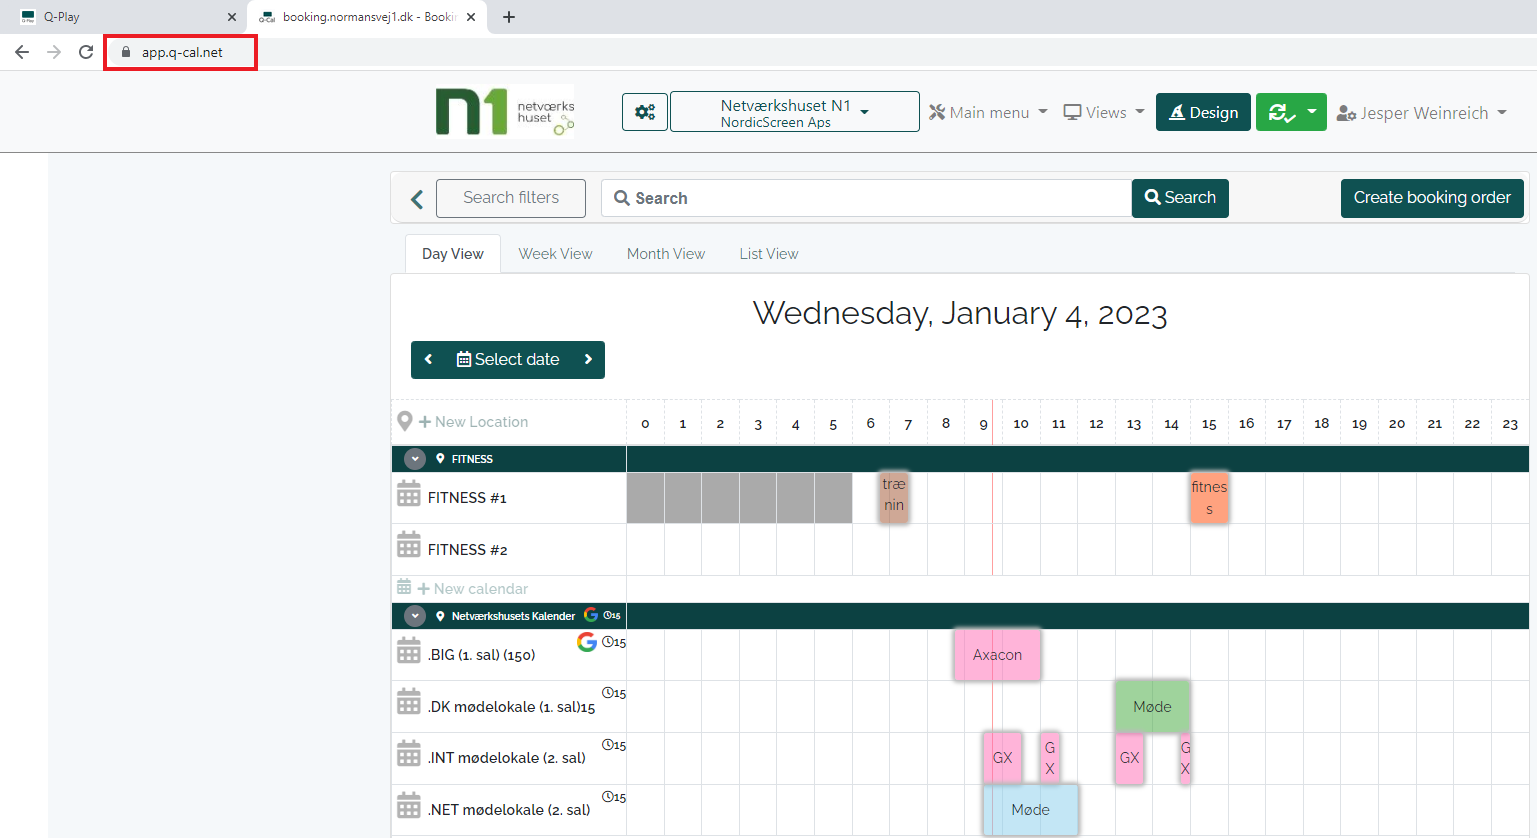 Q-Cal web interface displaying daily schedule with various bookings for fitness and meeting rooms on January 4, 2023.